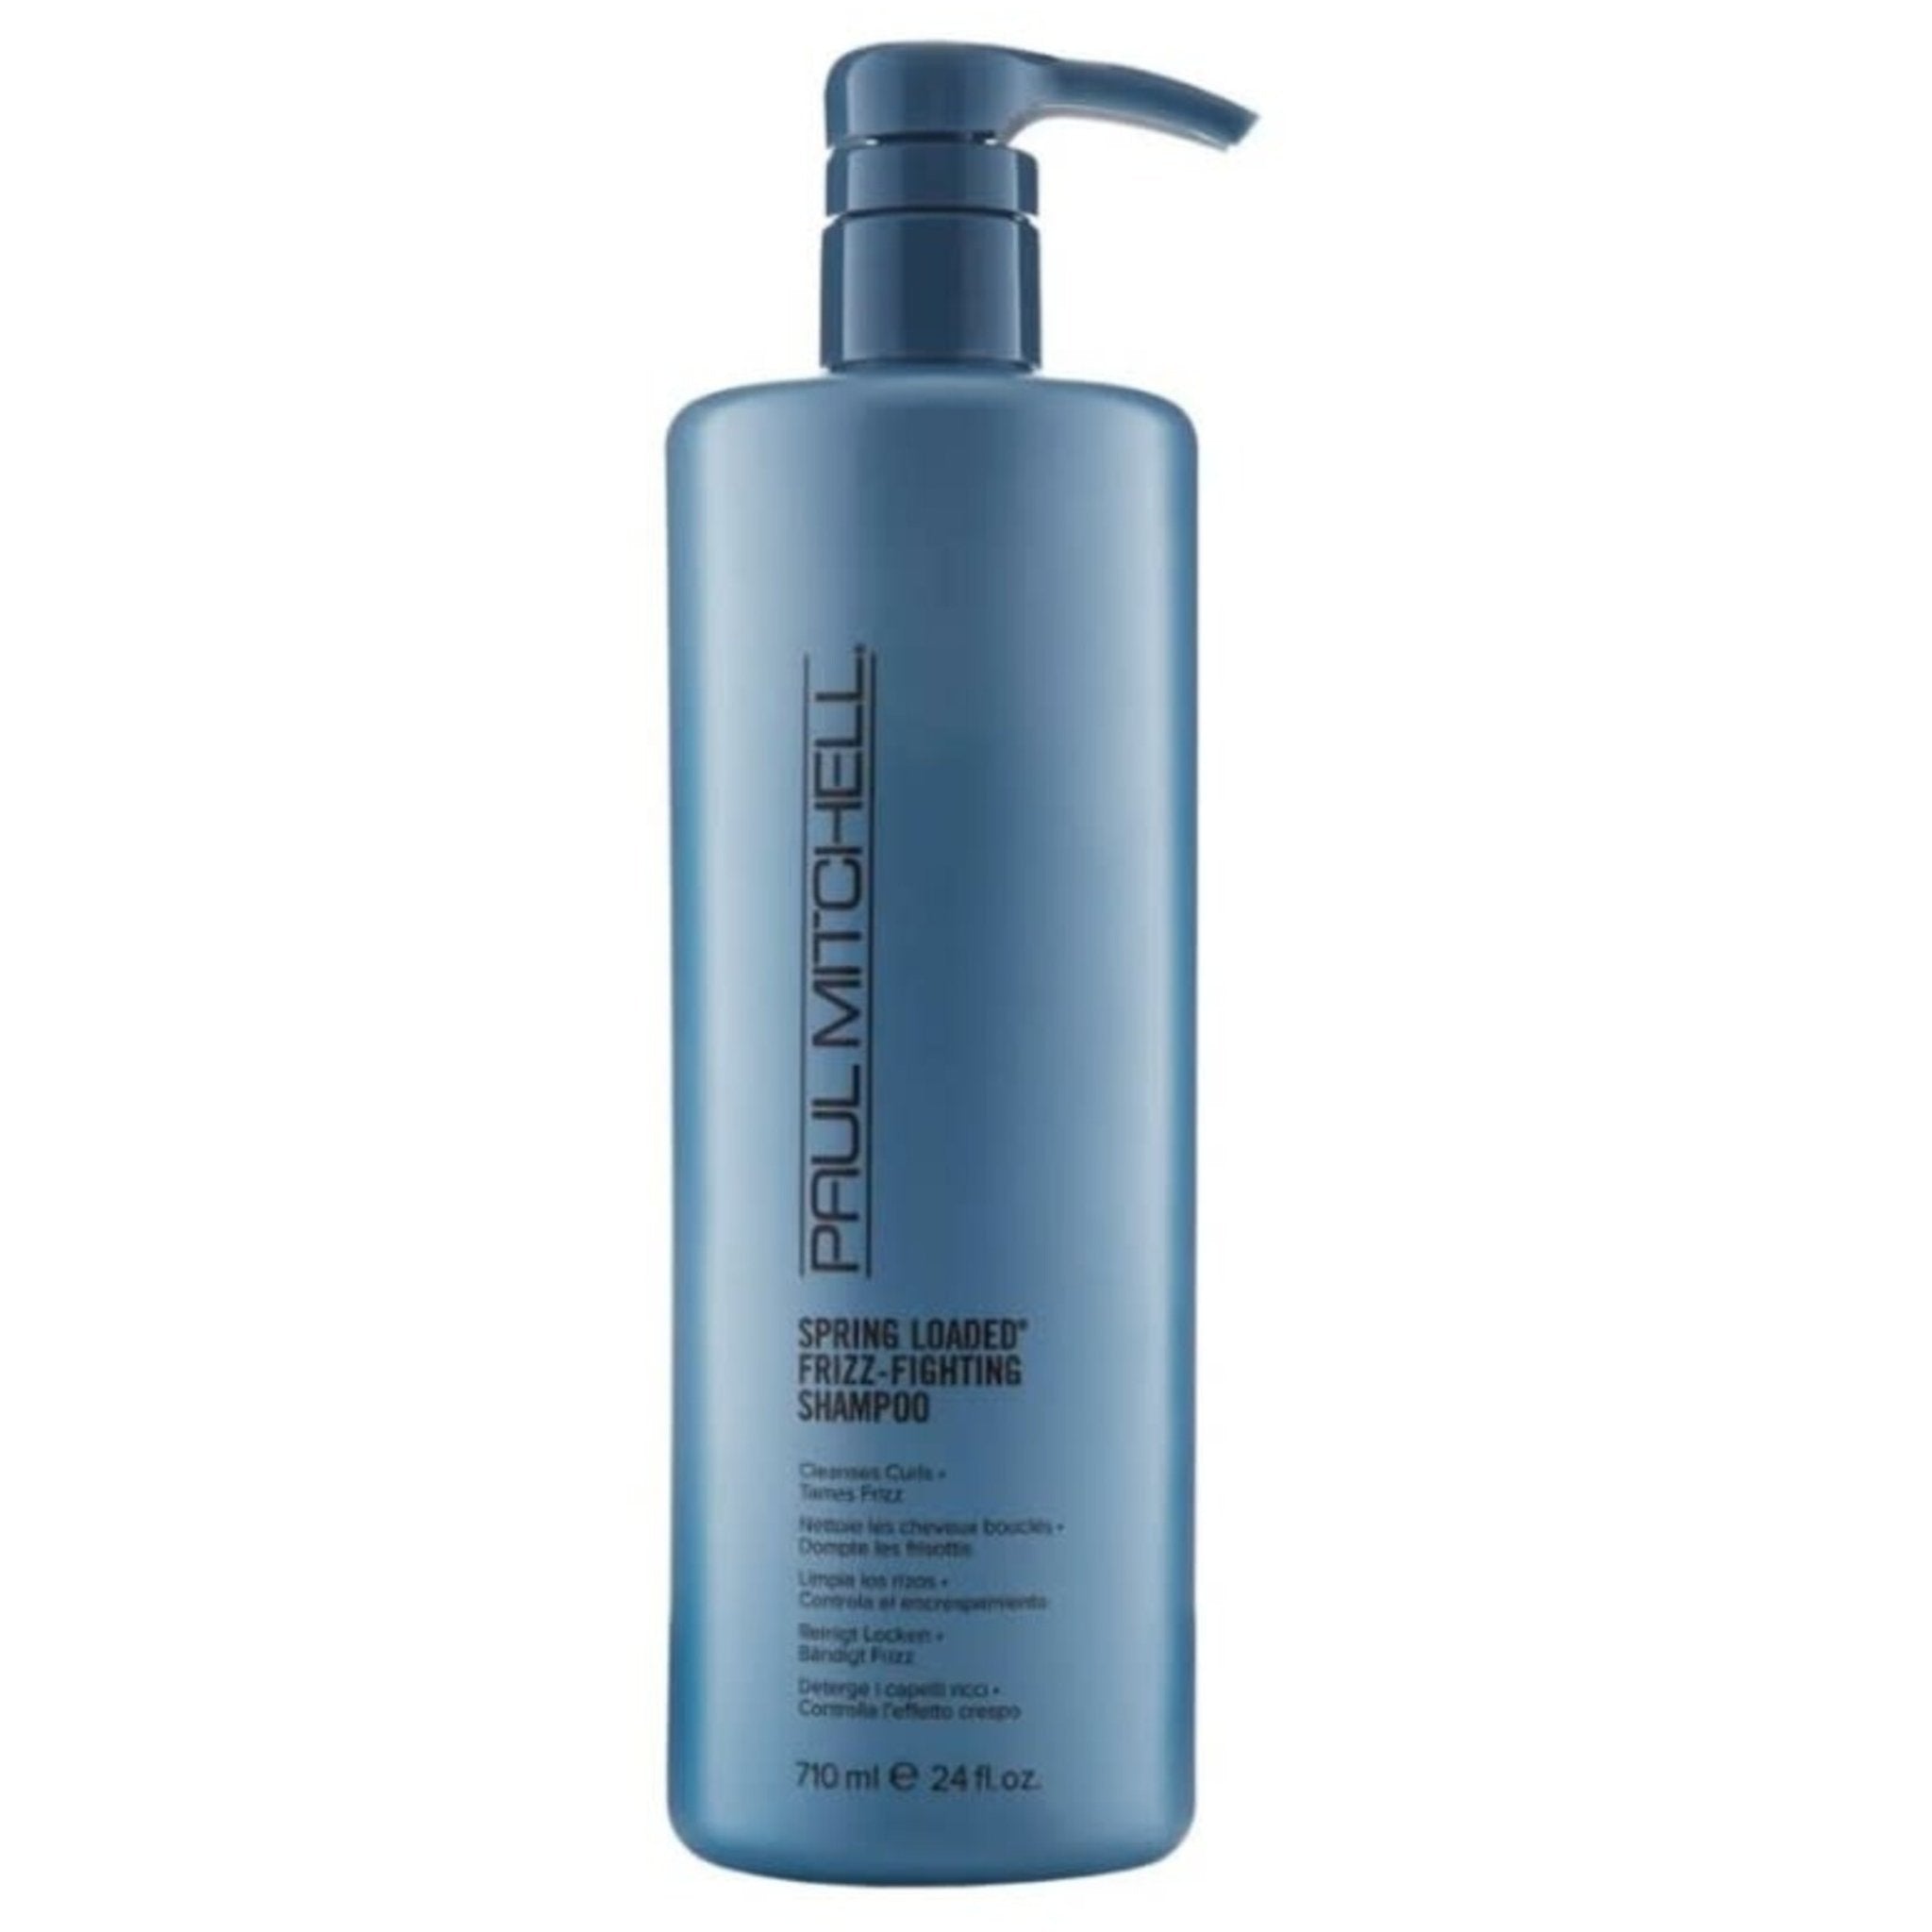 Paul Mitchell. Shampoing Spring Loaded Frizz Fighting - 710 ml - Concept C. Shop